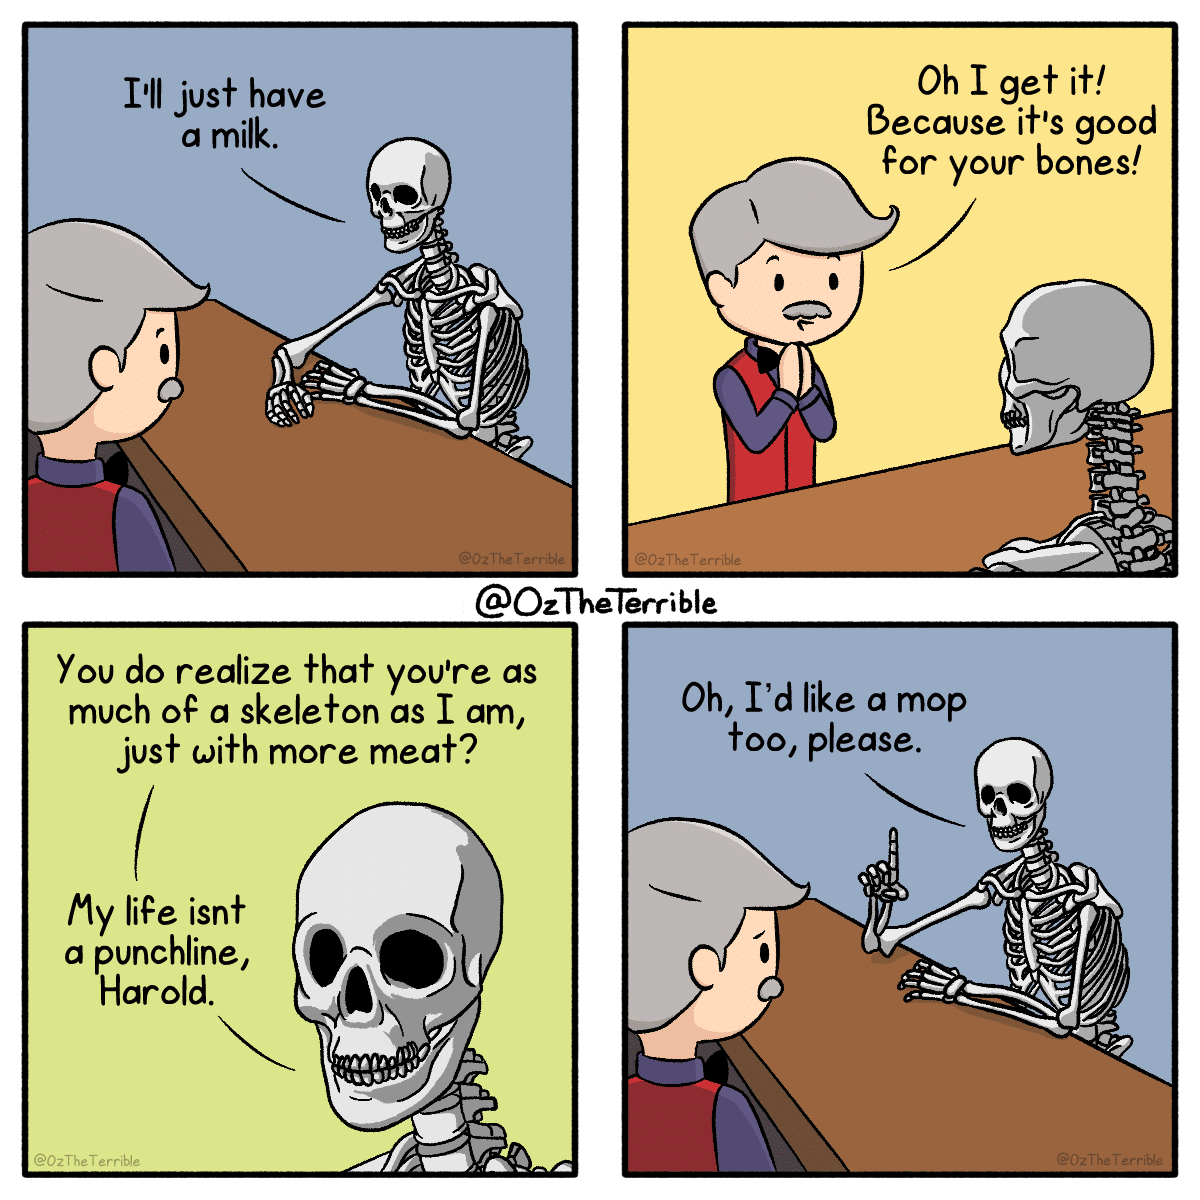 A skeleton walks into a bar..., Mister, Instagram Comics A skeleton walks into a bar..., Mister, Instagram text: I'll just have a milk. Oh I gef if! Because if's good For your bones! @OzTheTerrible You do realize That you're as much OF a skeleton as I am, just with more meat? my life isn+ a punchline, Harold. @OzTheTerrible Oh, I'd like a mop +00, please. 